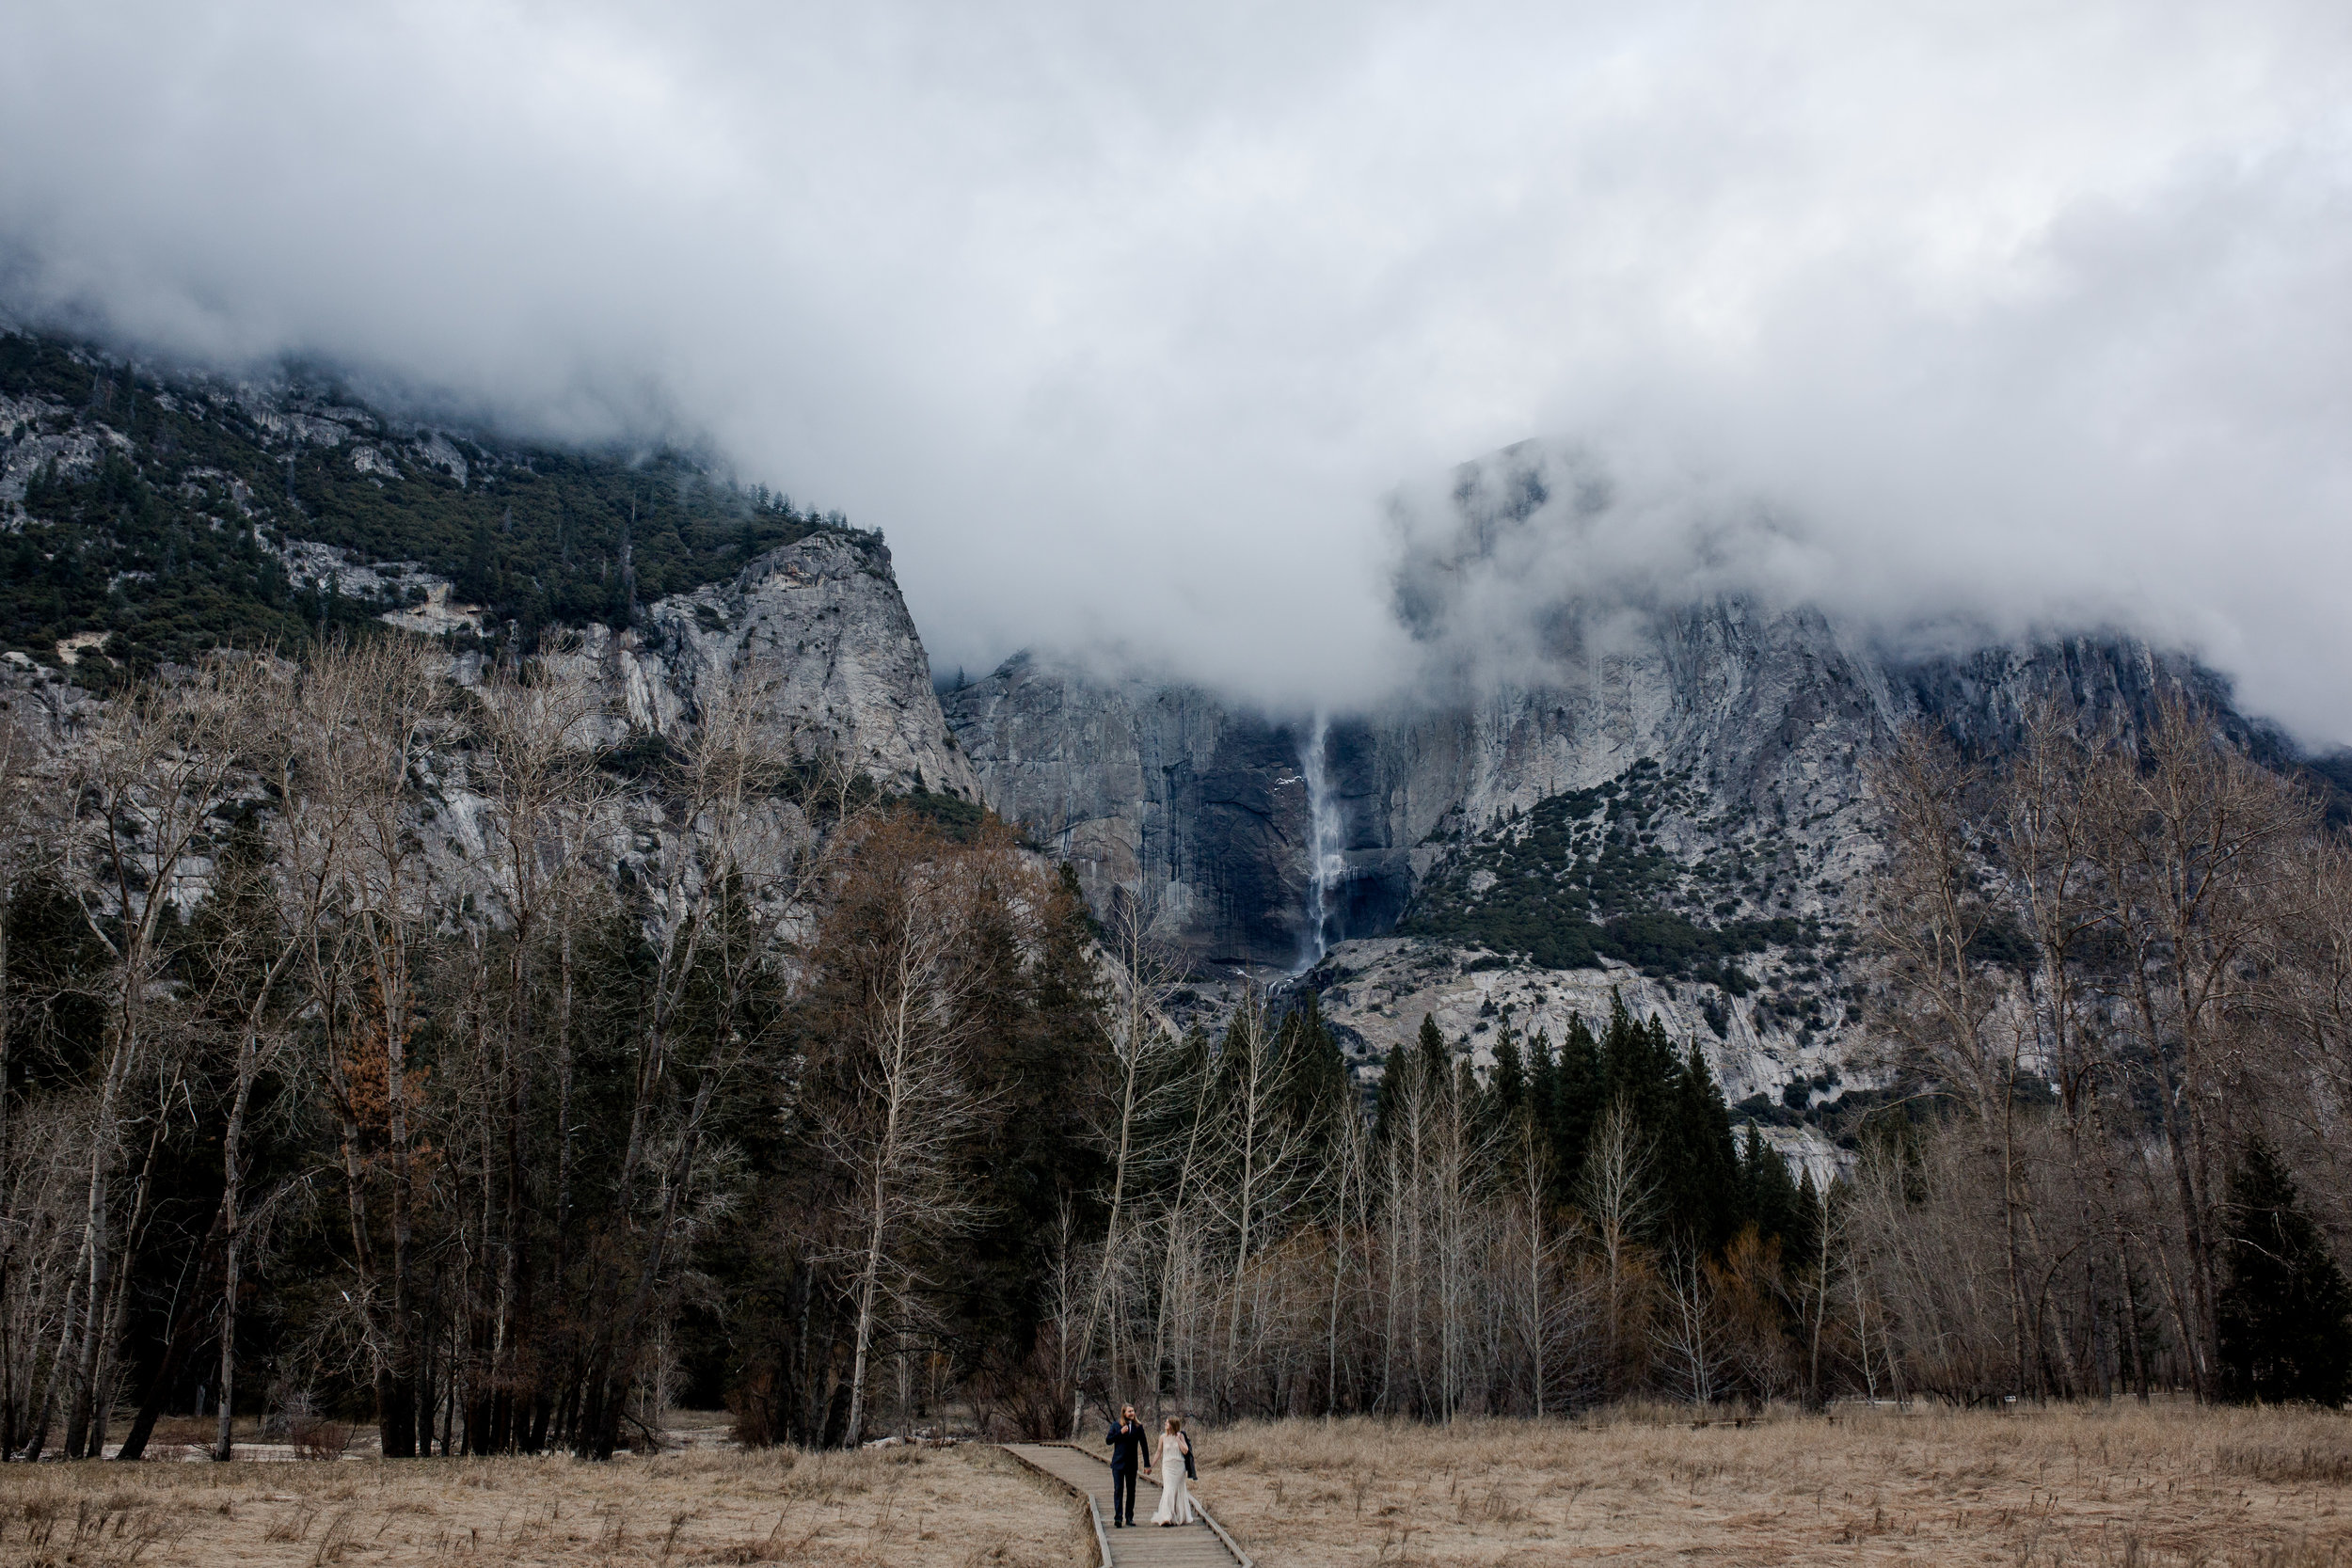 nicole-daacke-photography-yousemite-national-park-elopement-photographer-winter-cloud-moody-elope-inspiration-yosemite-valley-tunnel-view-winter-cloud-fog-weather-wedding-photos-91.jpg